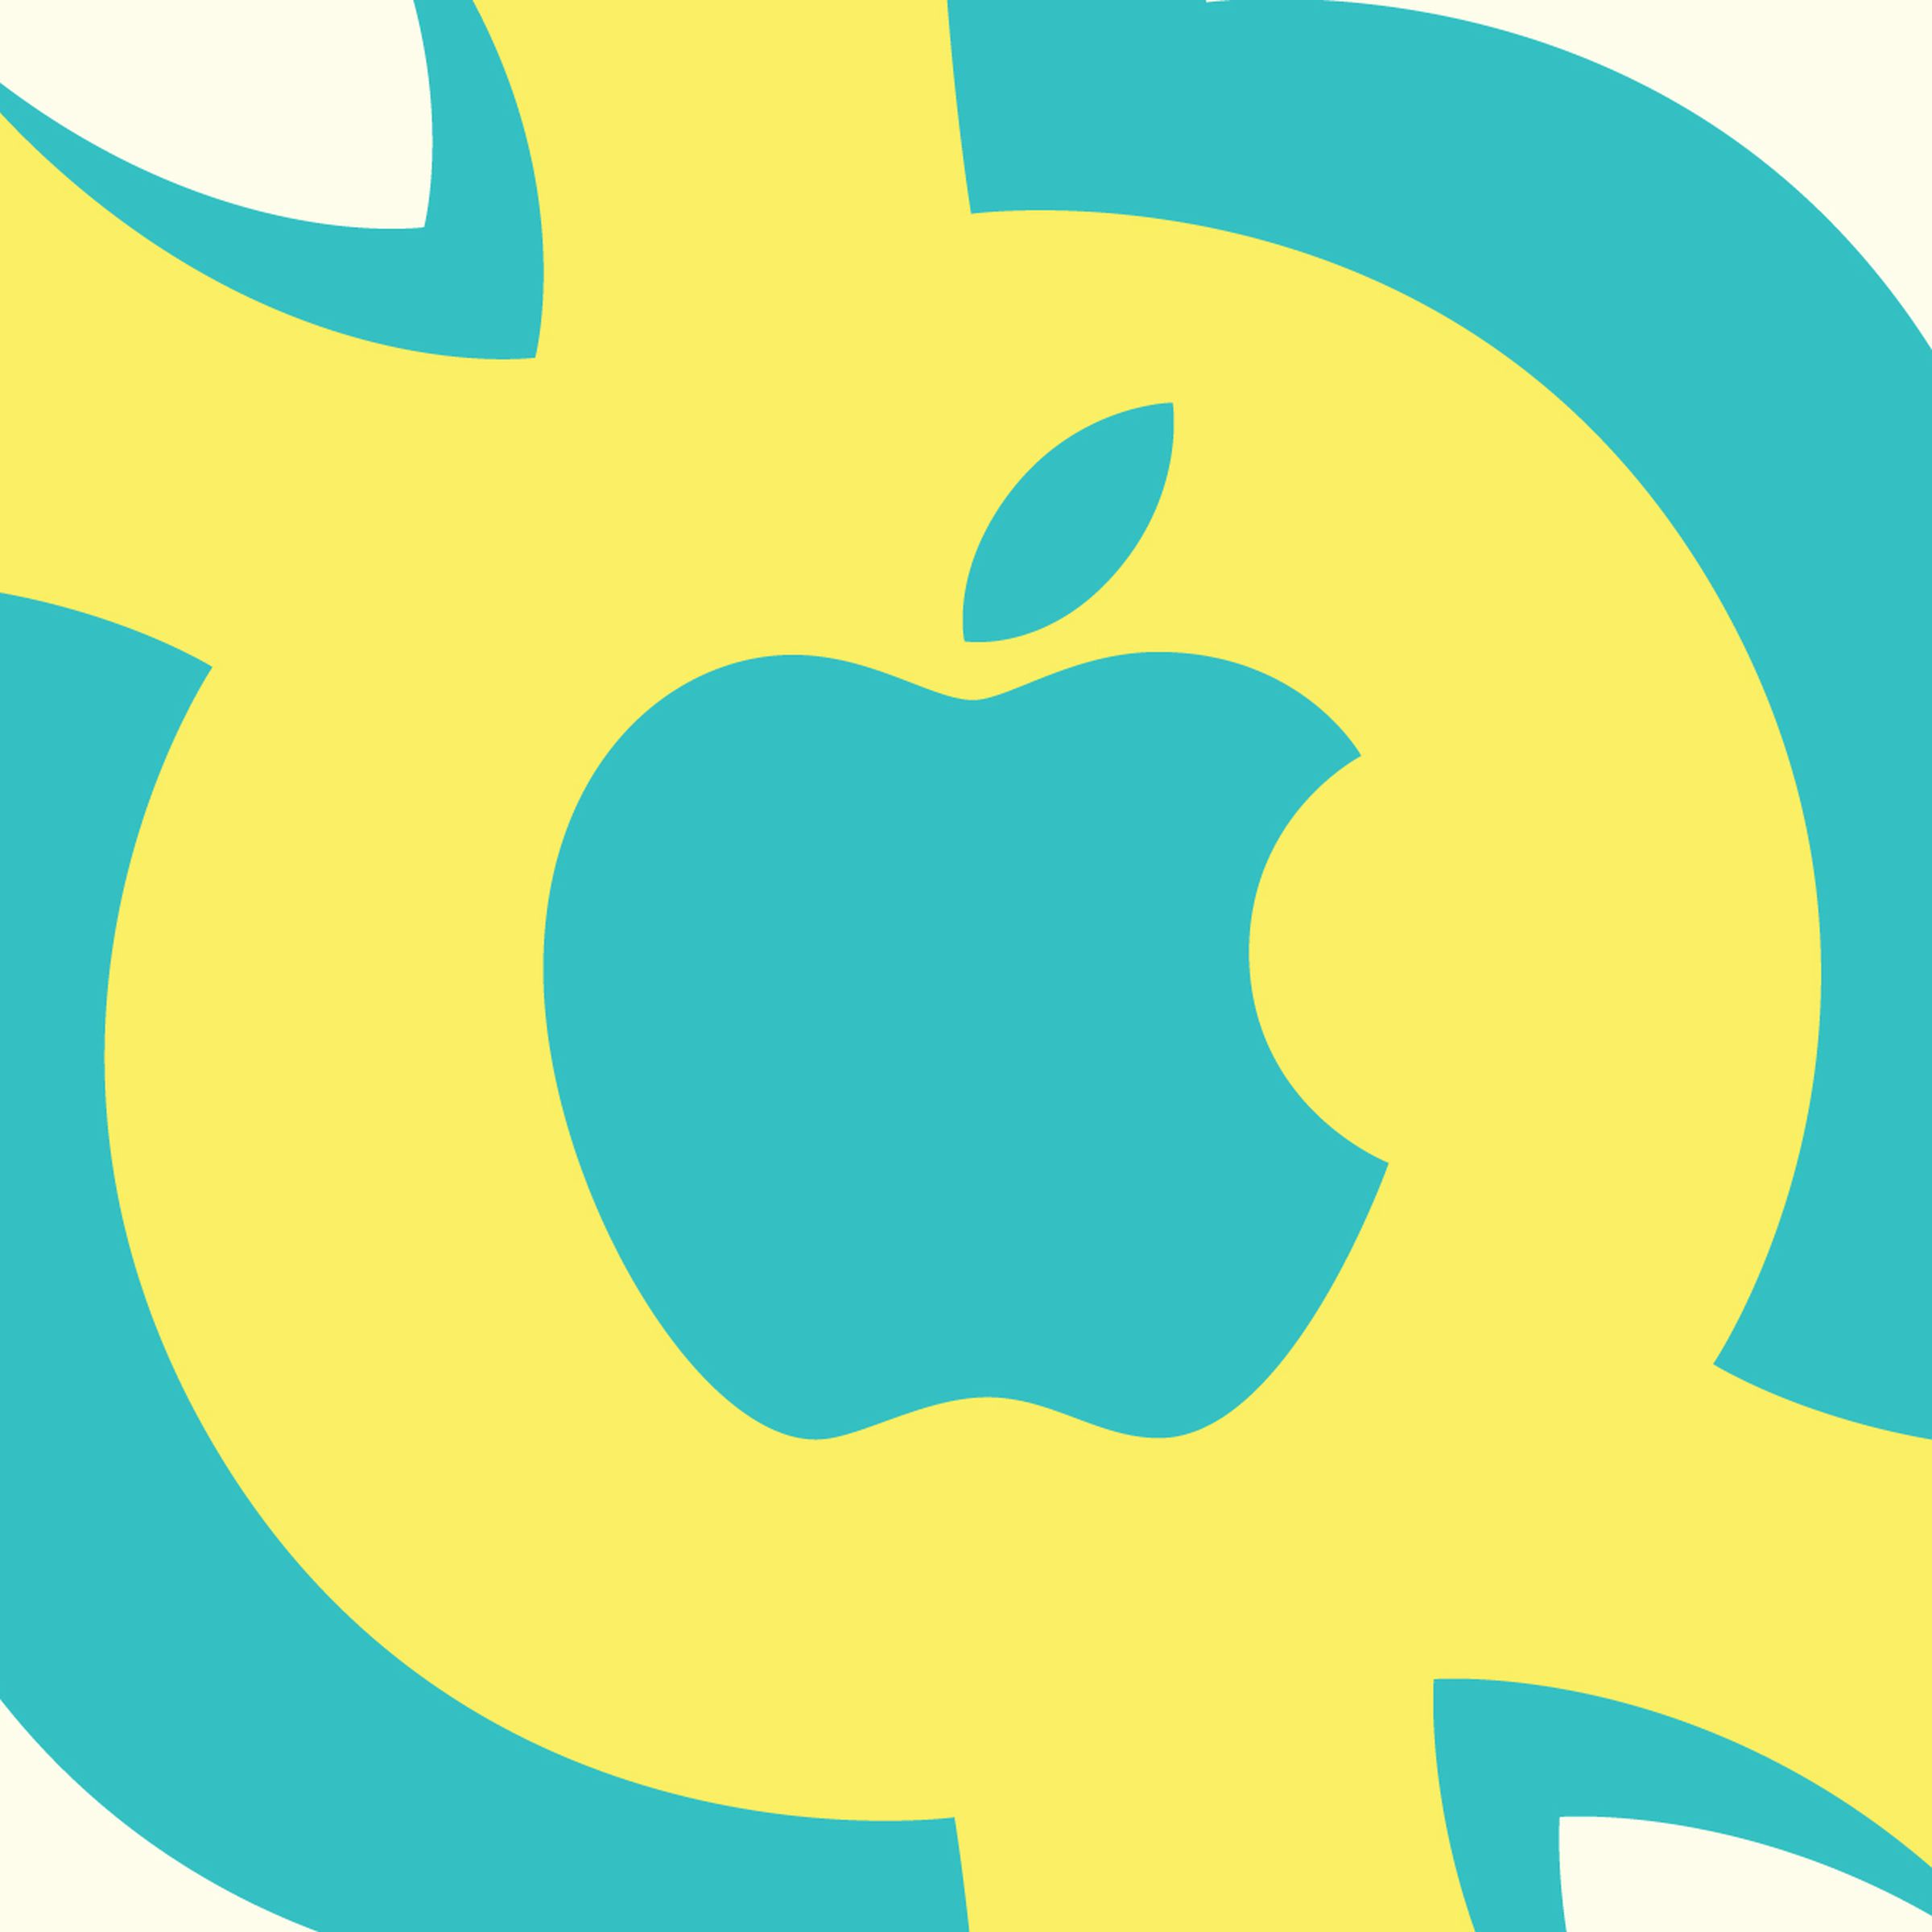 Illustration of the Apple logo on a yellow and teal background.